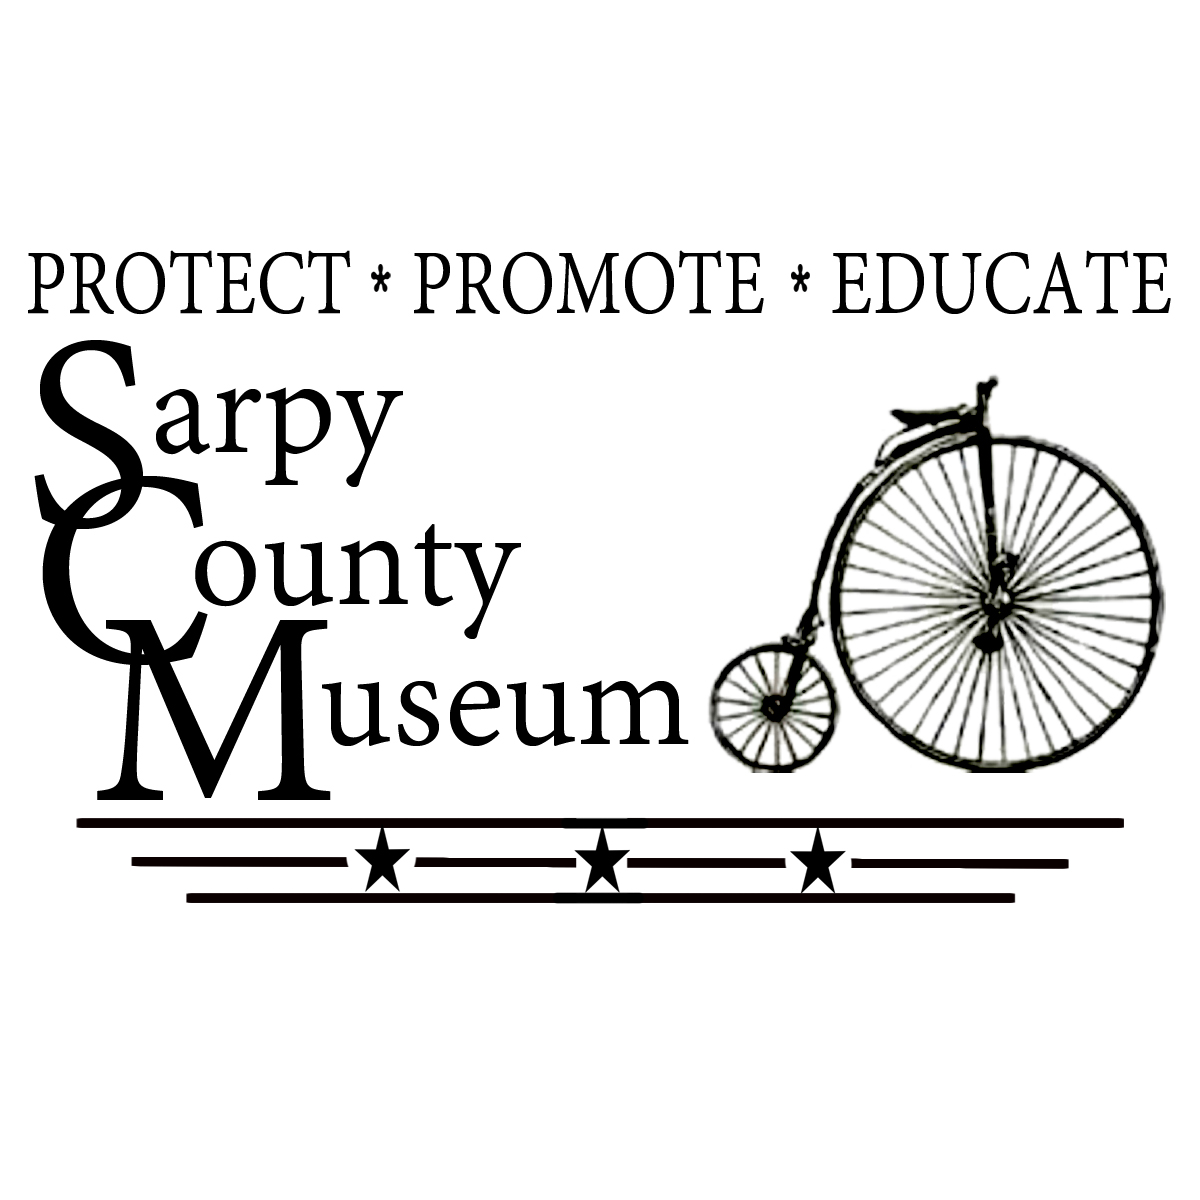 Logo for the Sarpy County Museum. At the top states "Protect- Promote- Educate". Underneath says "Sarpy County Museum" with a pennyfarthing antique bicycle image next to it.